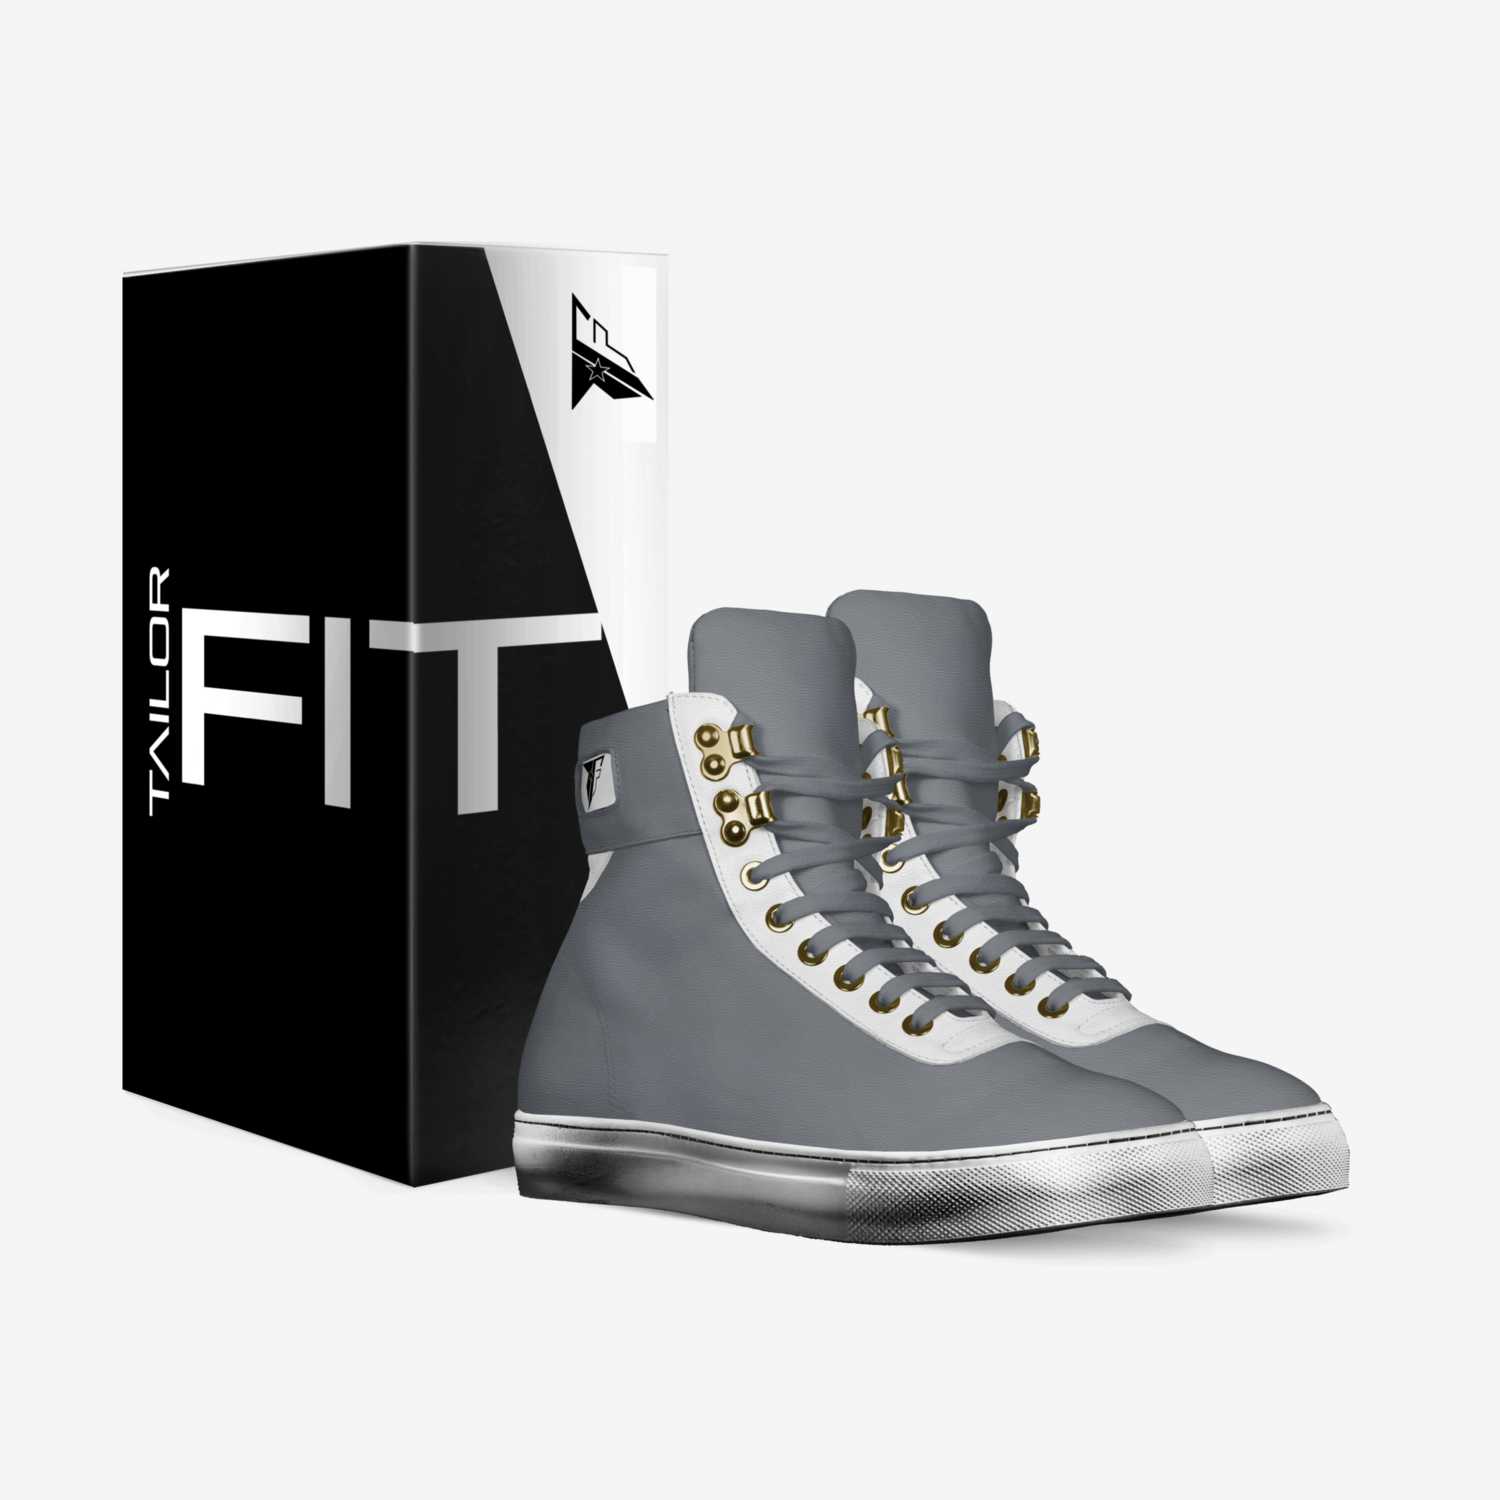 Tailorfit custom made in Italy shoes by Talor Fiit | Box view